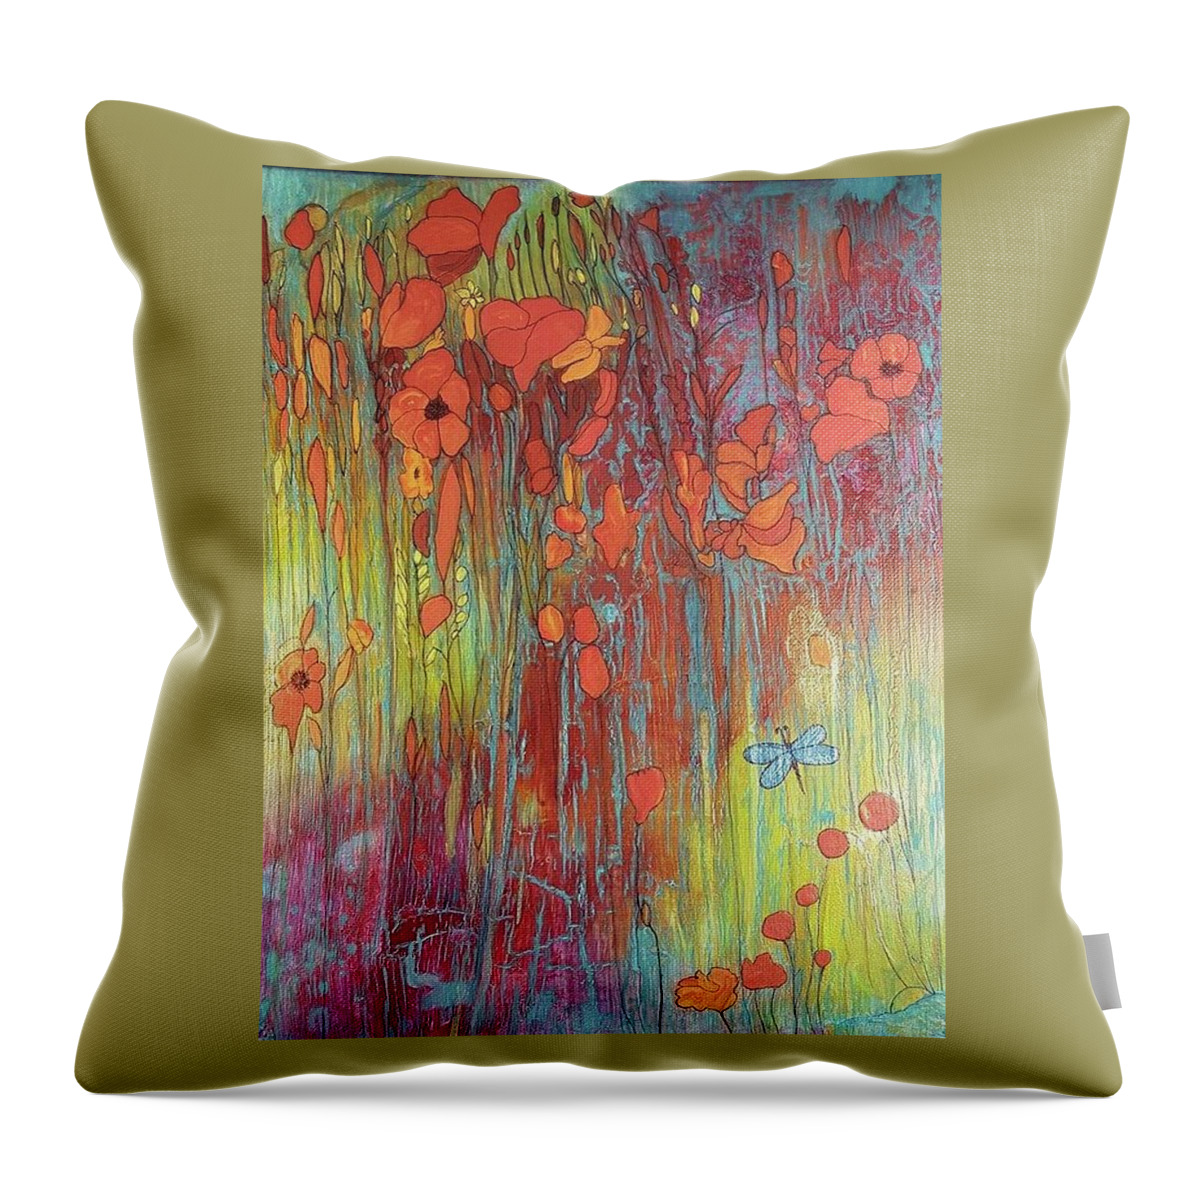 #acrylicpaintsandinks #acrylicabstracts #abstractartforsale.#originalartforsale #artandmusic #supportlocalartists #canvasart #sugarplum #sugarplumtheband.com Throw Pillow featuring the painting Poppies and Dragonfly by Cynthia Silverman